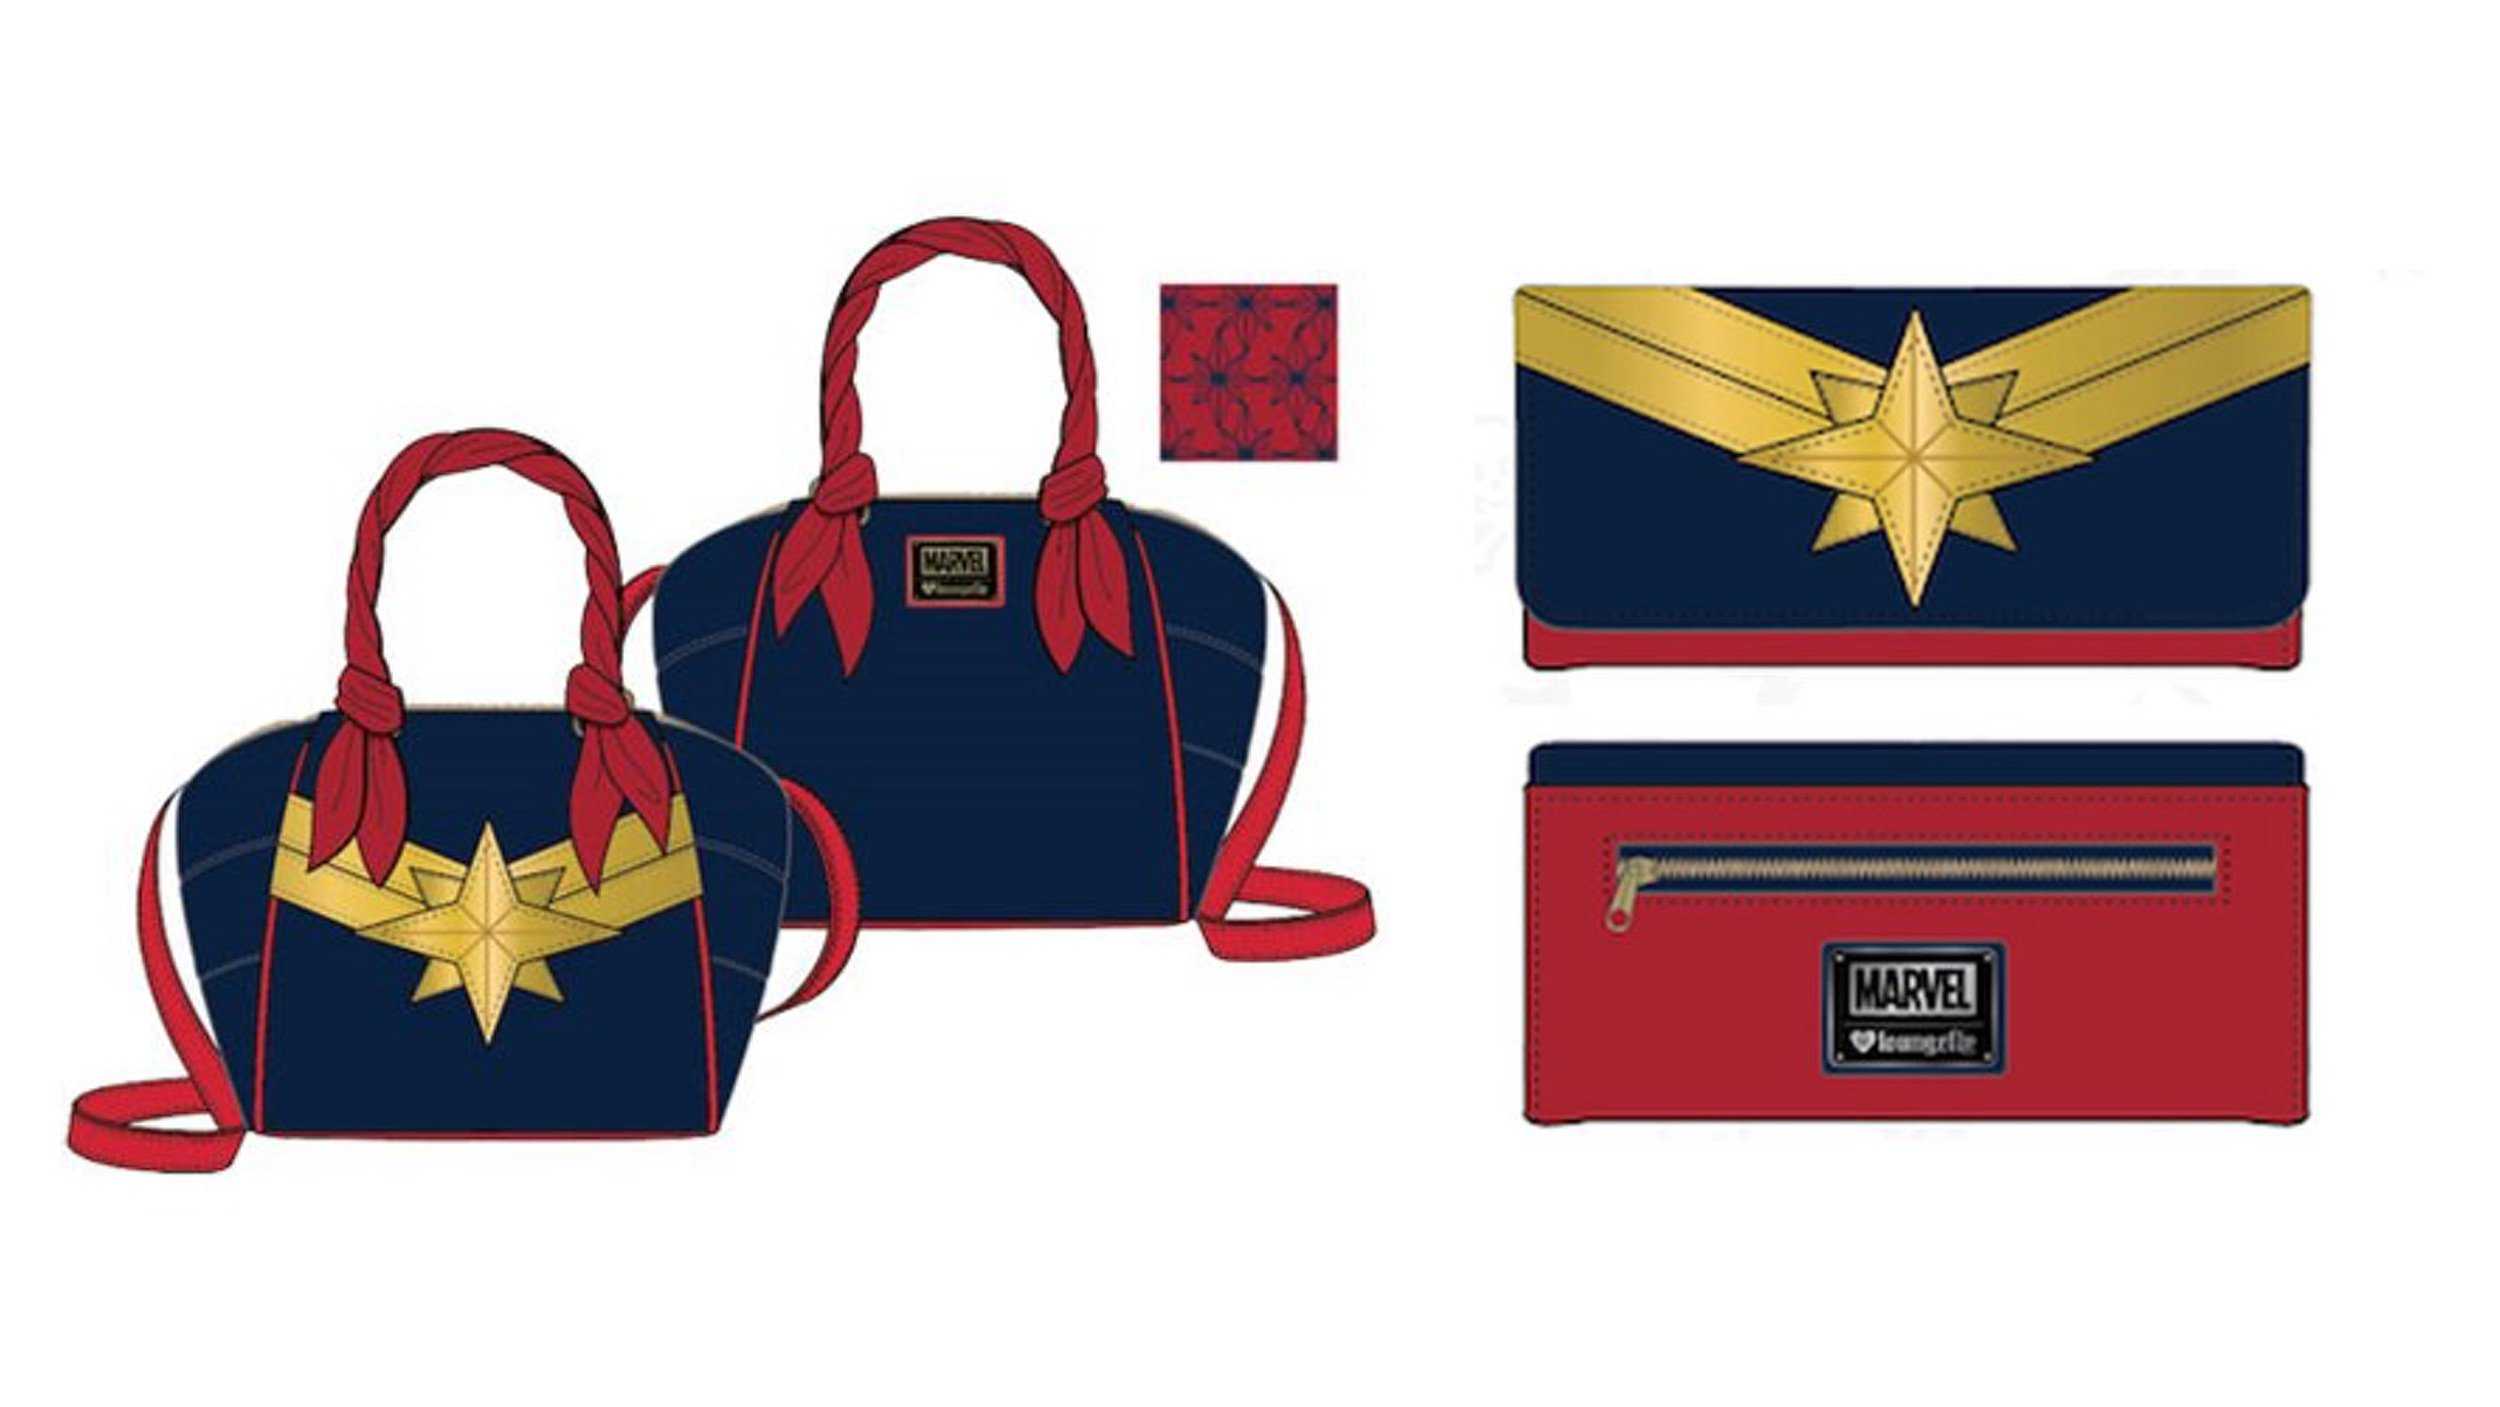 vamers-geekosphere-lifestyle-fashion-these-gorgeous-loungefly-bags-are-inspired-by-marvel-heroines-loungefly-bag-and-purse-inspired-by-captain-marvel